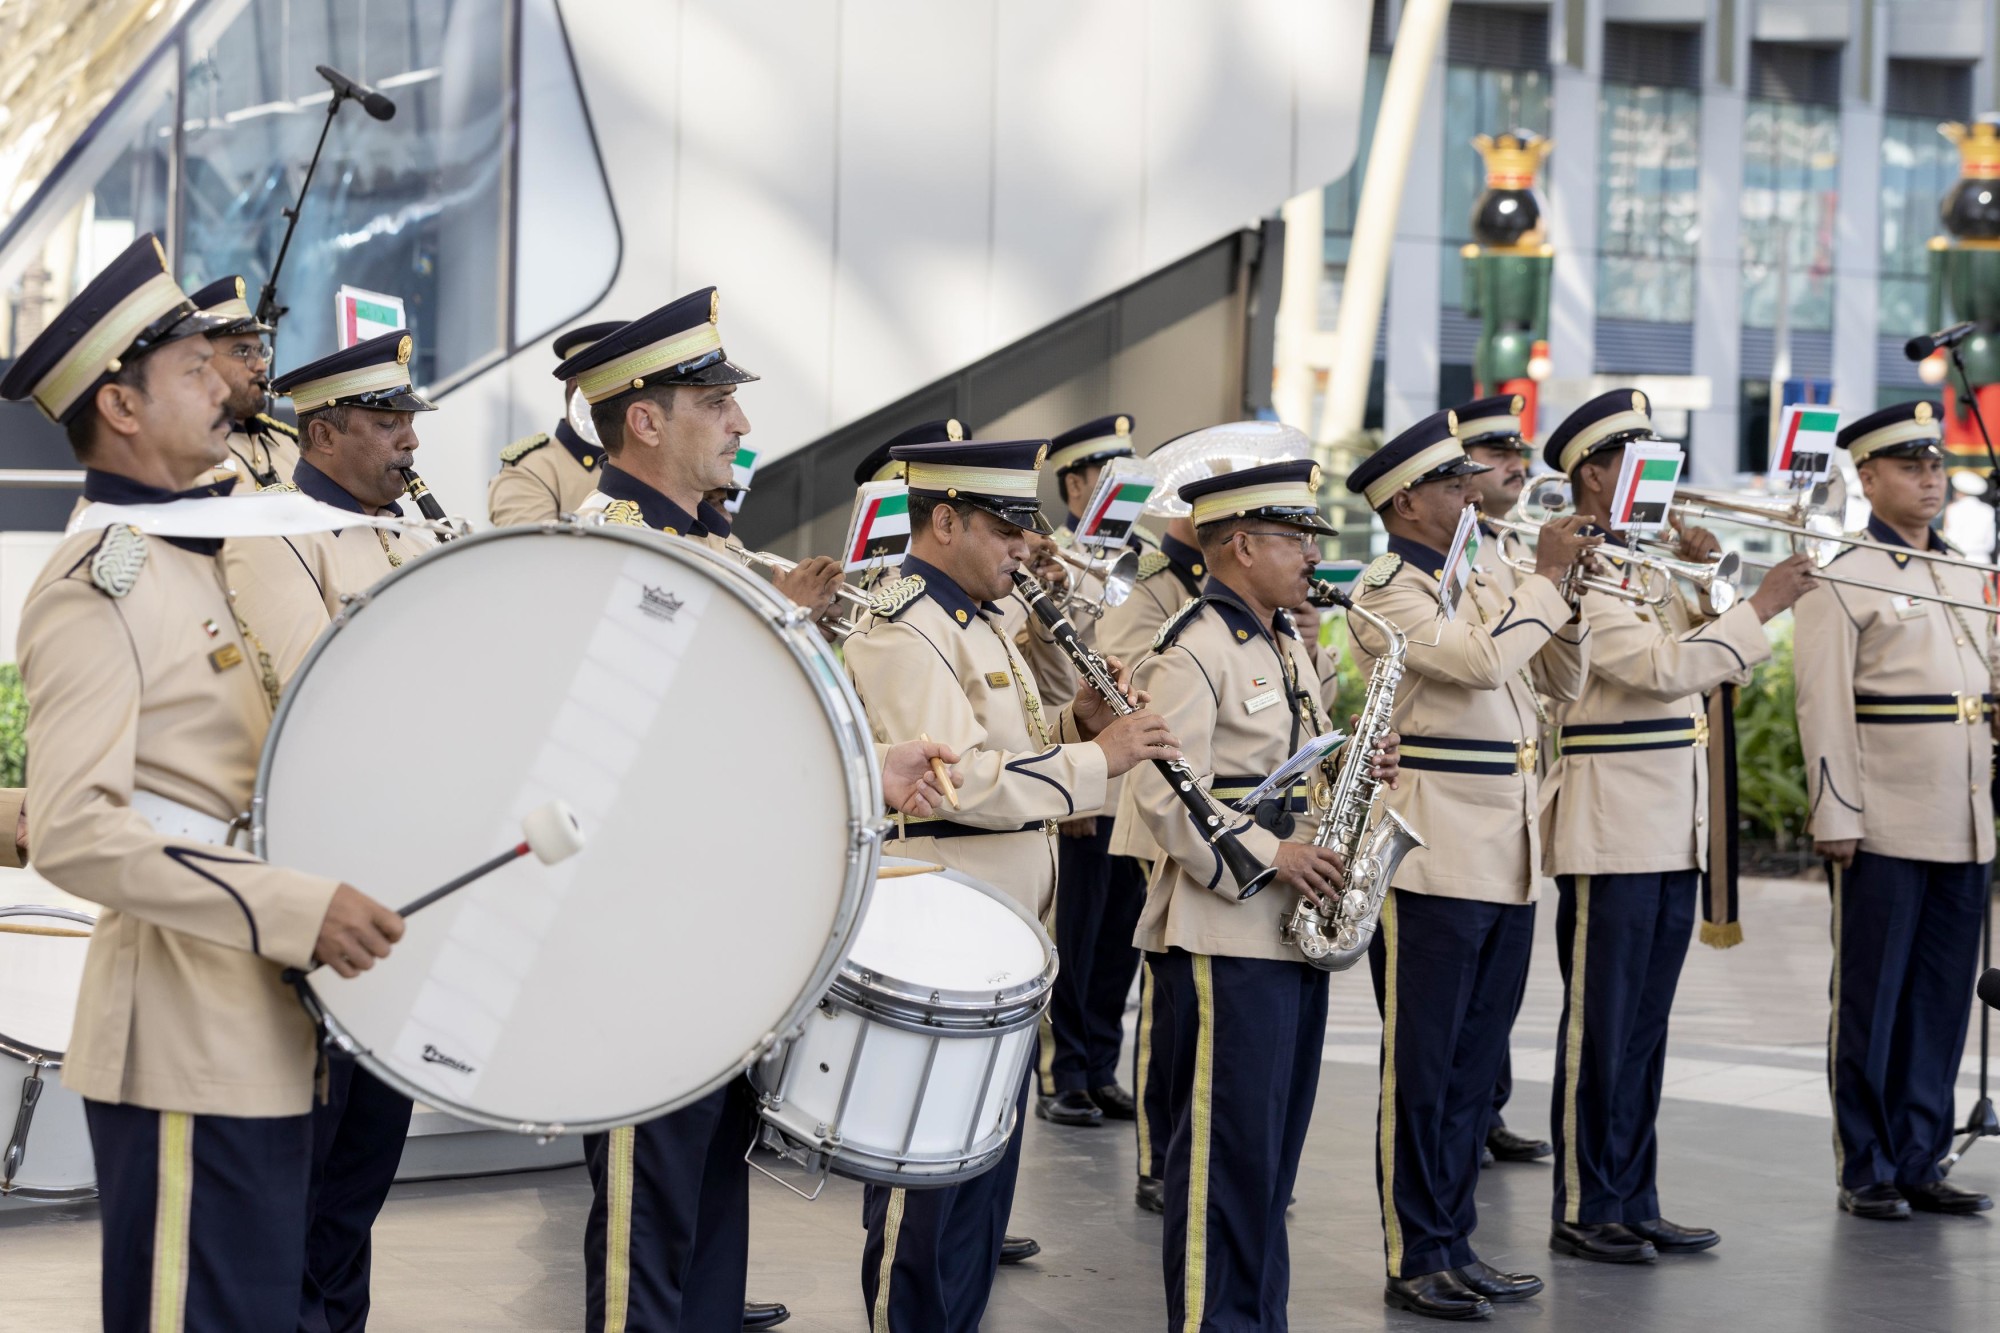 Marching Band performance during the League of Arab States Honour Day Ceremony in Al Wasl Plaza m25251